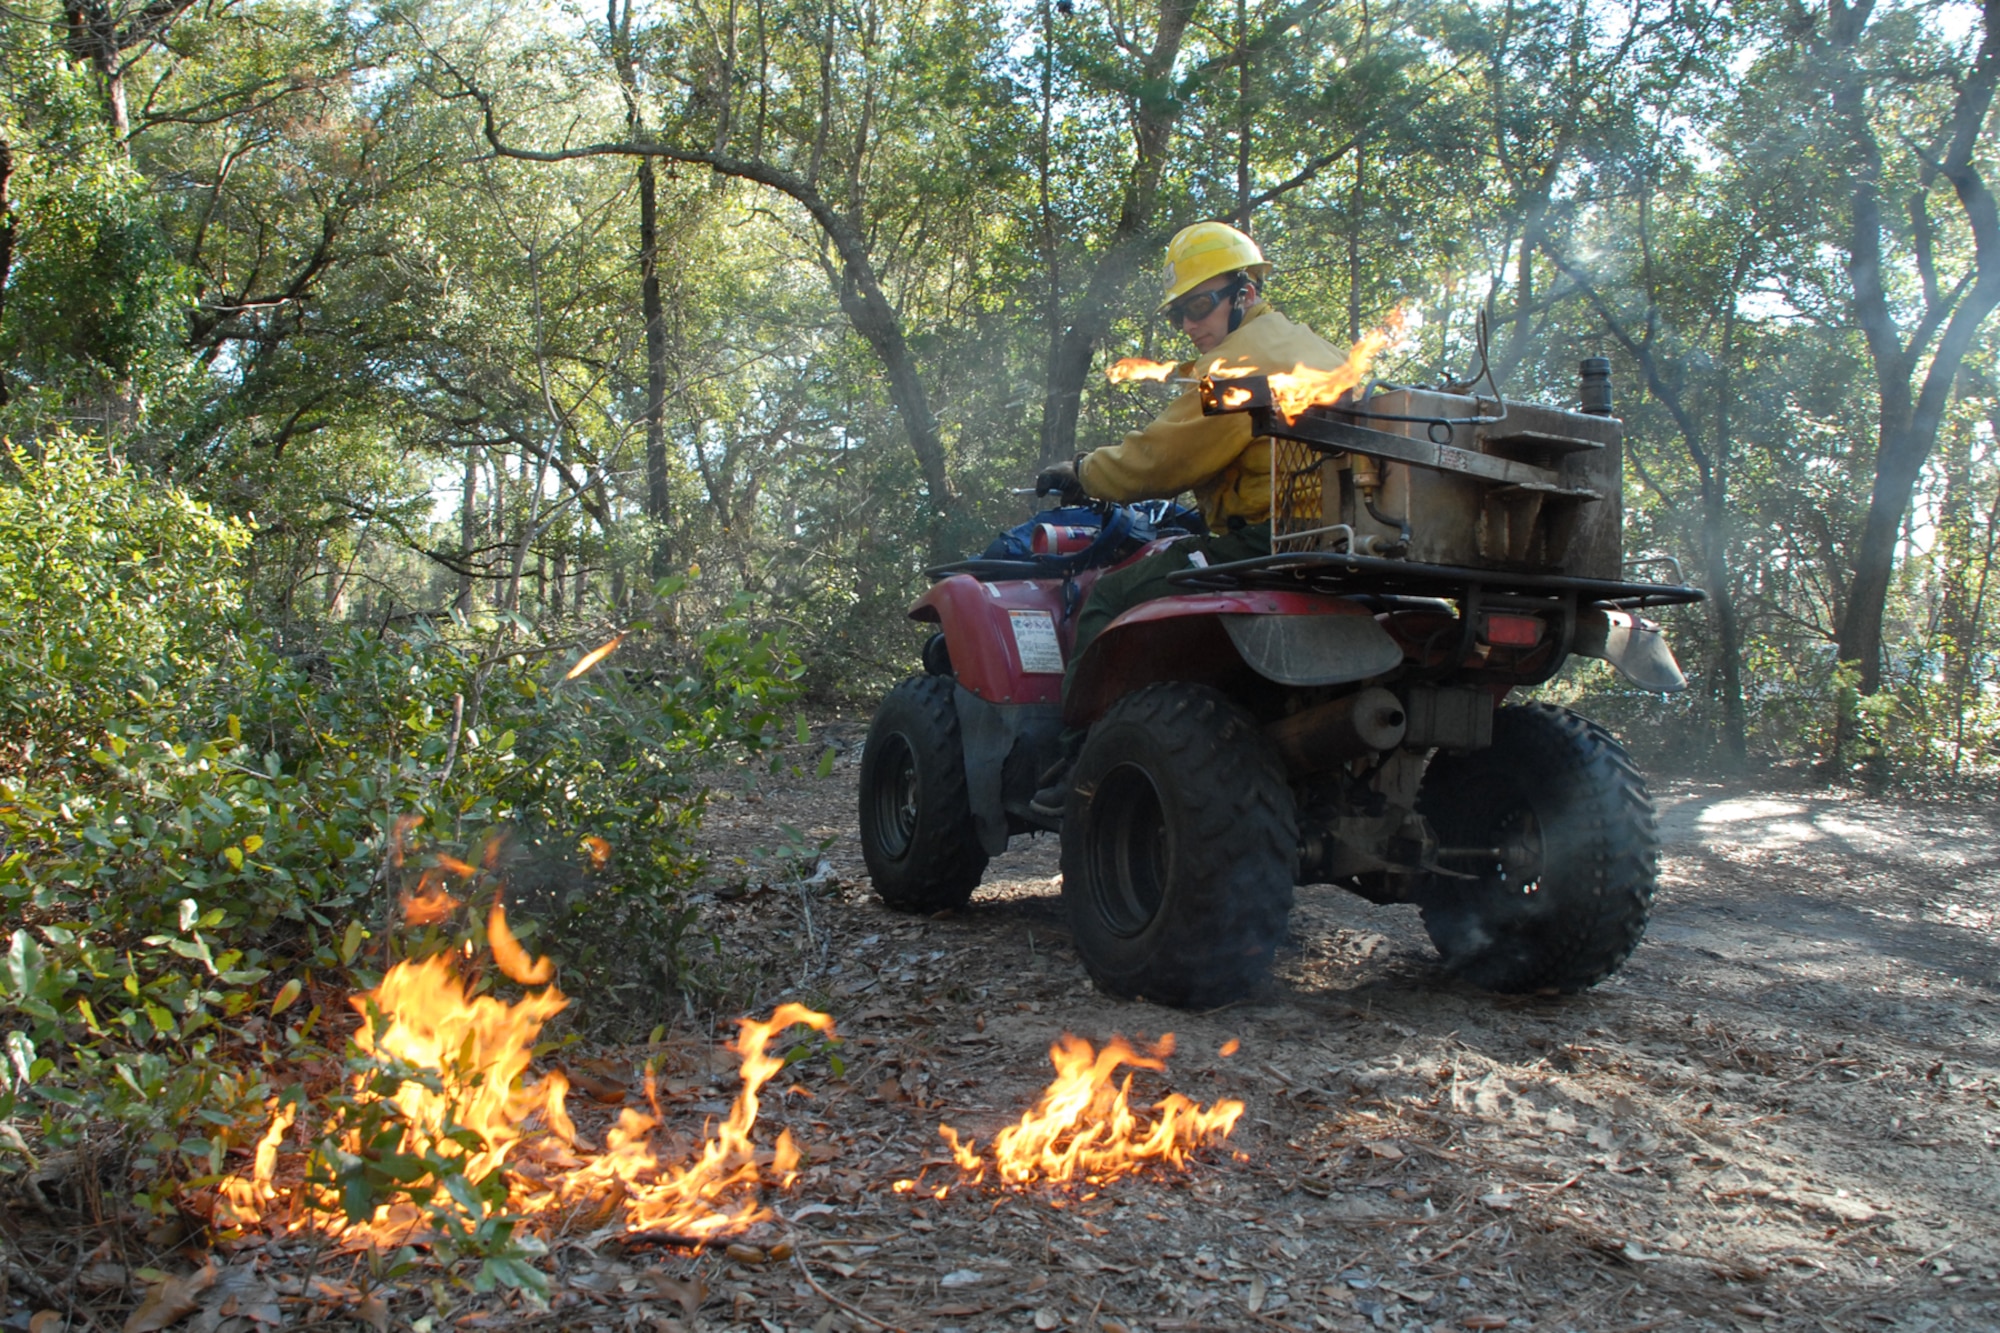 EGLIN AIR FORCE BASE, Fla. -- Tom Murrie, a Jackson Guard forestry technician and wildland fire specialist, uses a mixture of fuels in a drip line to spark a prescribed fire from an all terrain vehicle at White Point, an 85-acre recreation area on the Choctawhatchee Bay Jan. 29. Many native plants and animal species depend on Eglin's fire-dependent long-leaf pine ecosystem, 11 of which are federally protected. Endangered species such as the red-cockaded woodpecker, depend on fire that is typically caused by either lightning strikes or Eglin's resident fire managers to survive. As of the 2008 control burn season, Jackson Guard's five-year average is 73,000 acres burned annually. (U.S. Air Force Photo by Staff Sgt. Mike Meares)